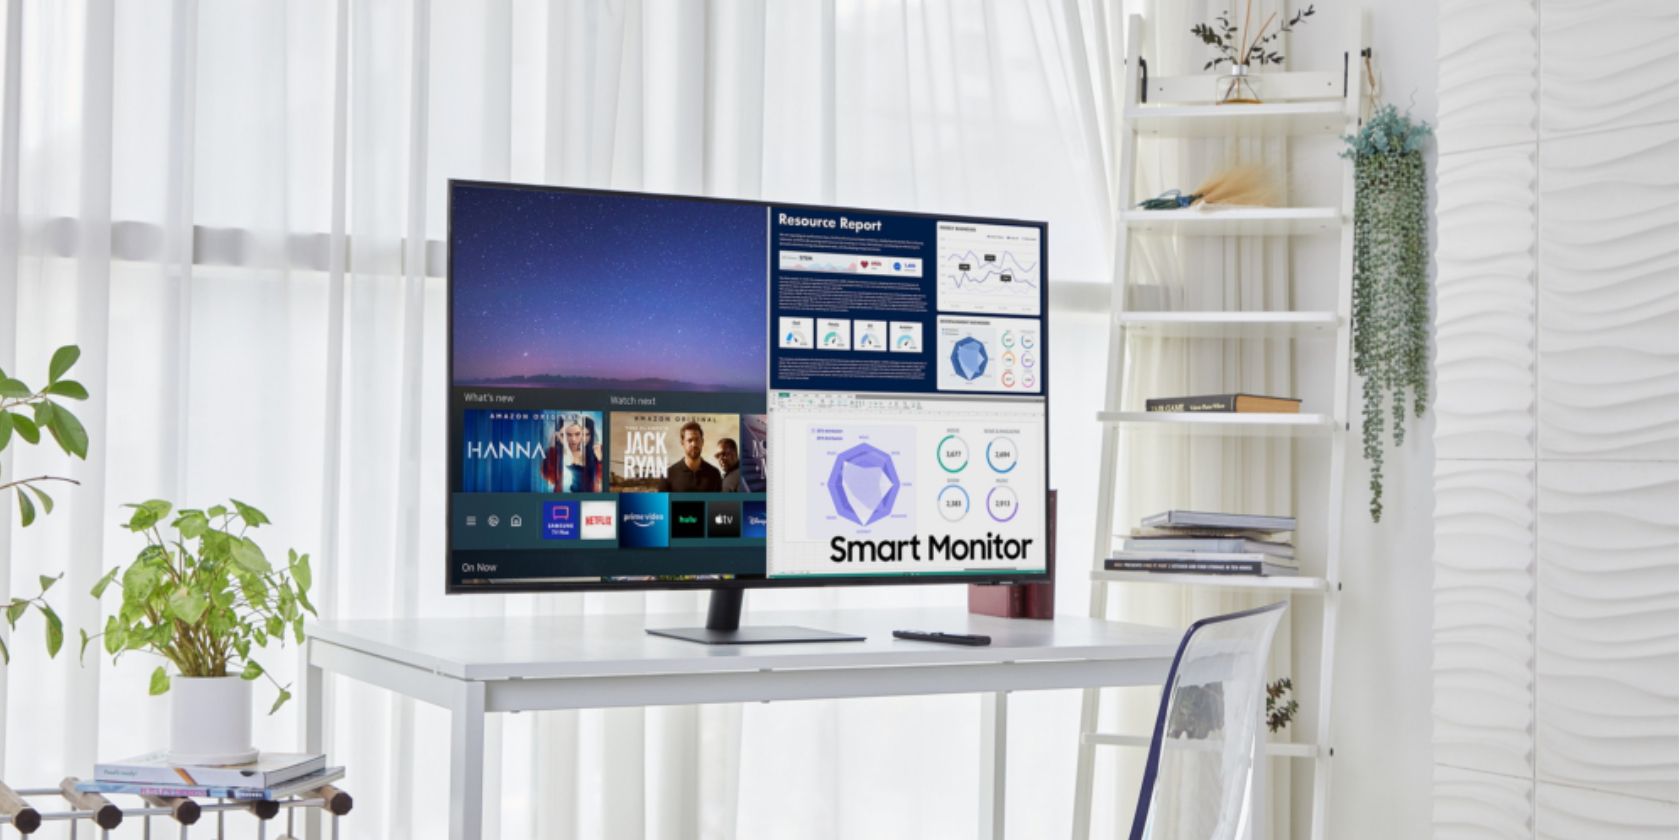 A close-up of one of Samsung's new smart monitor models